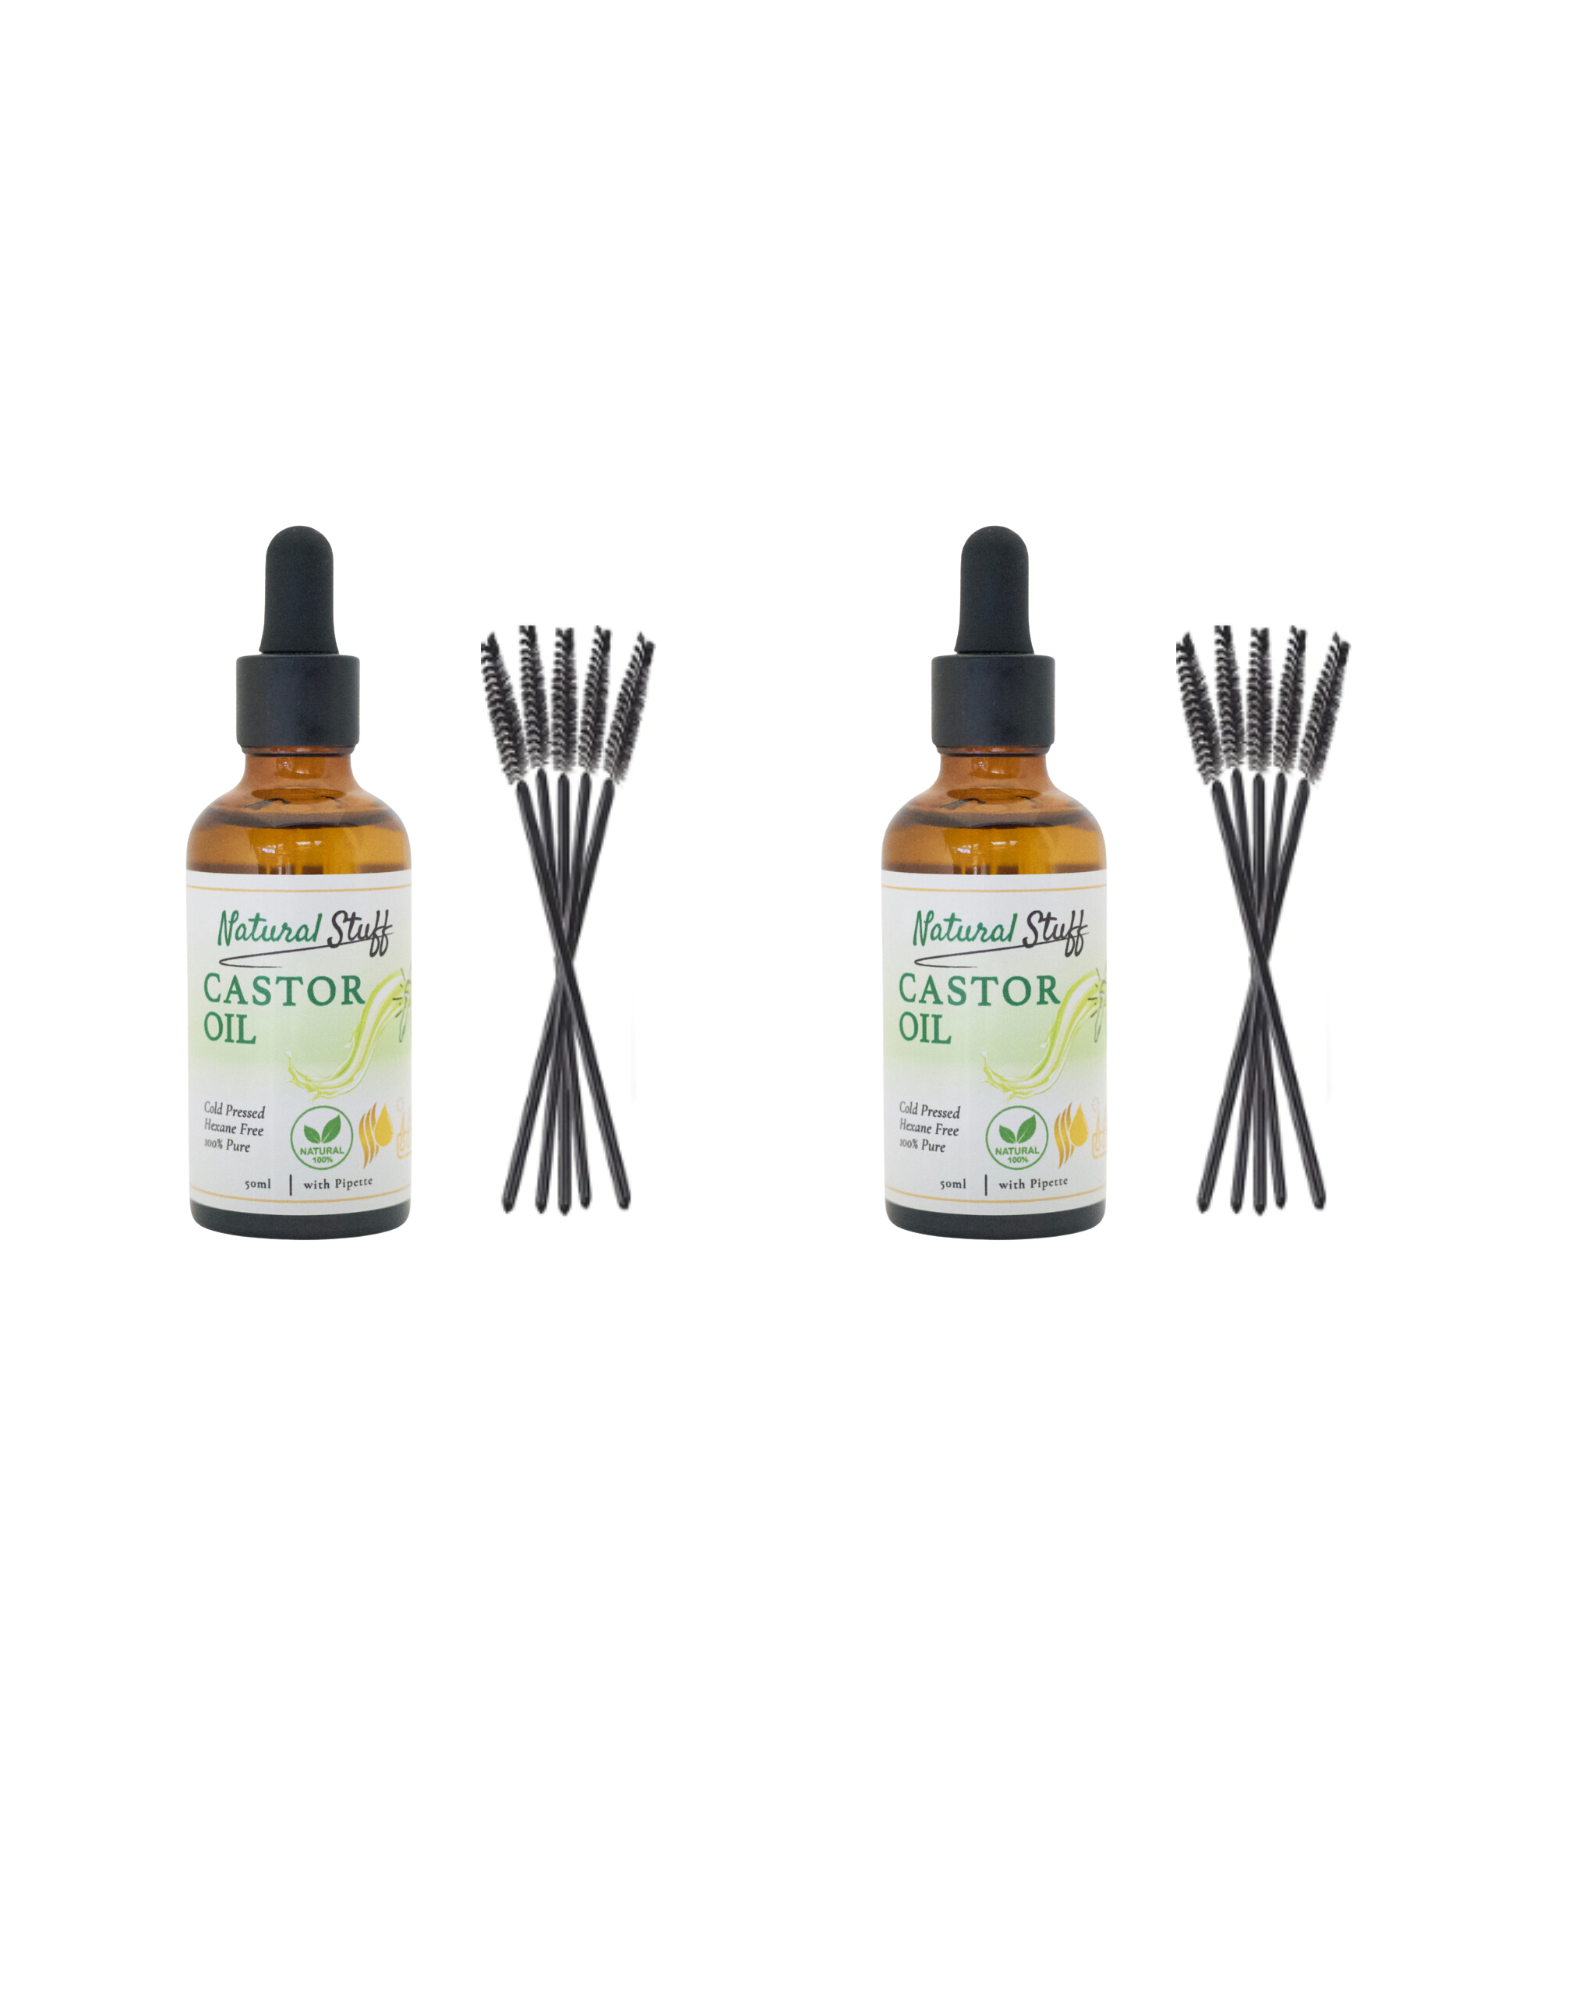 Natural Stuff Premium Castor Oil Cold-pressed Hexane Free 50ml with free 5 Mascara Wands